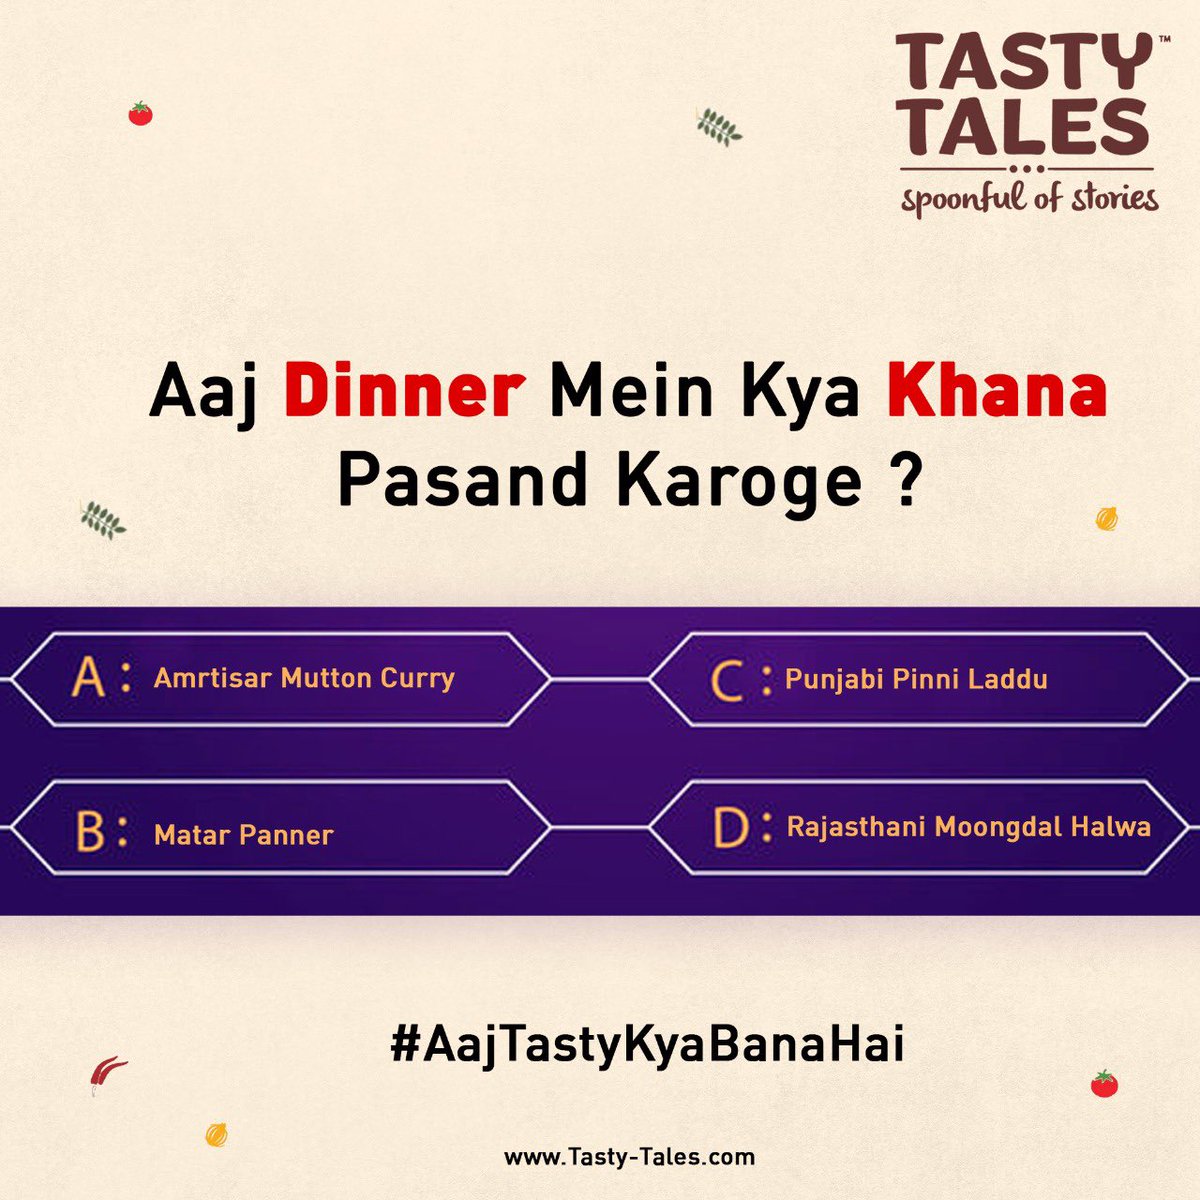 Vote for your favourite dish for dinner and comment below and we shall let you know what’s the most voted dish from our Tasty Tales Range. #aajtastykyabanahai #TastyTales #Spoonfulofstories #readytocook #readyin20mintues #DishesallaroundIndia #deliciousCurryPastes #Ordernow